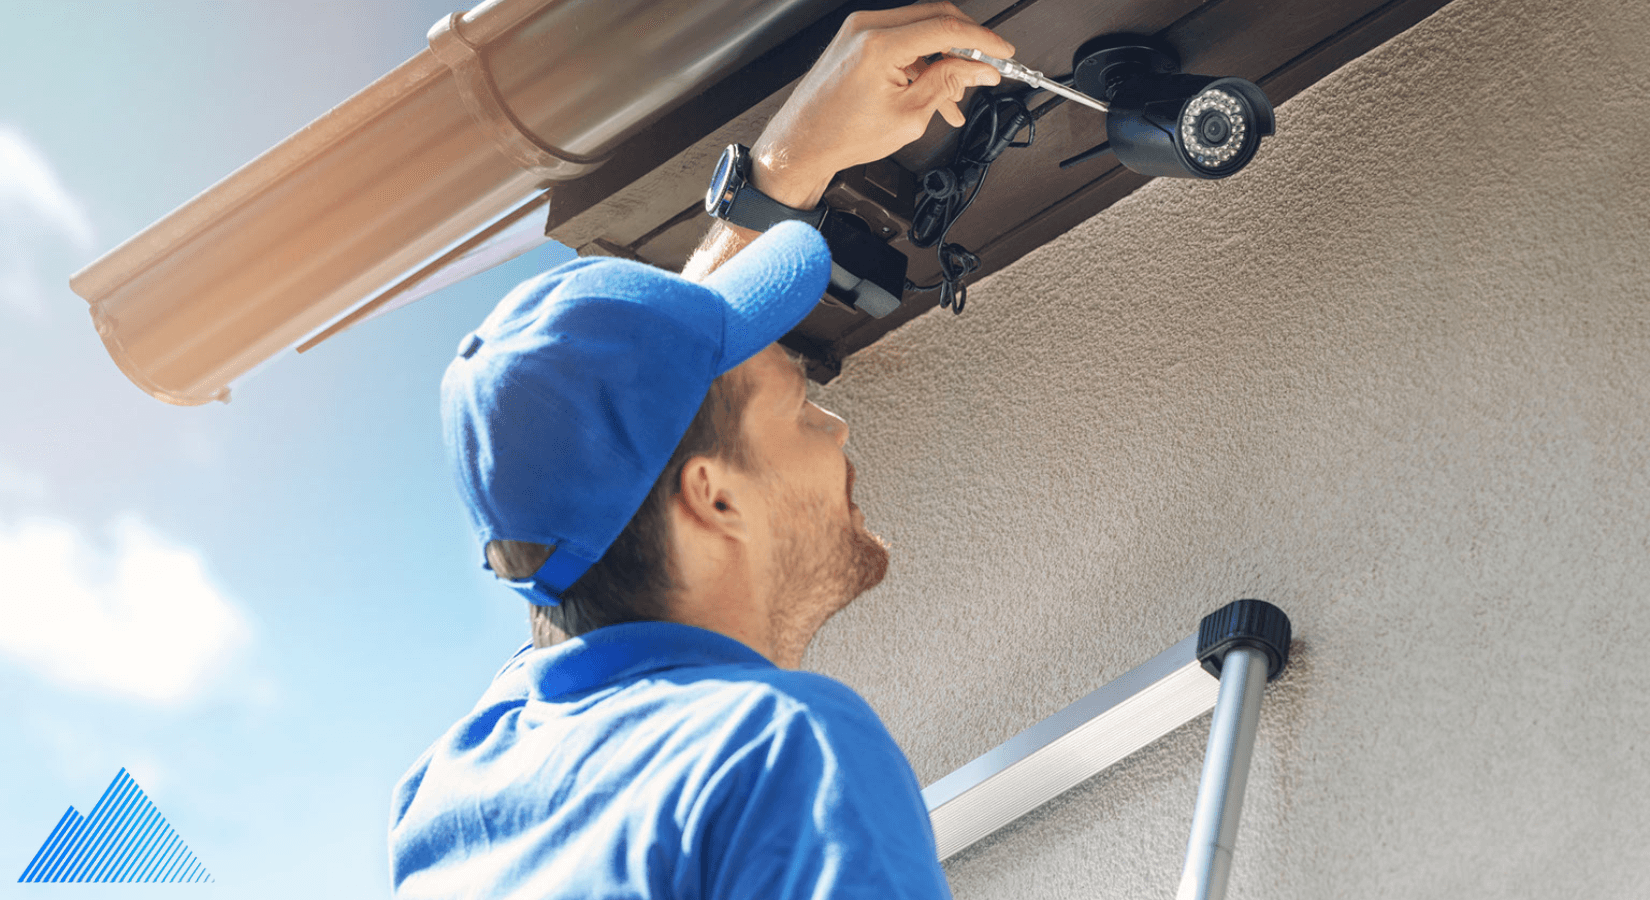 Professional installer installing a security camera outdoors